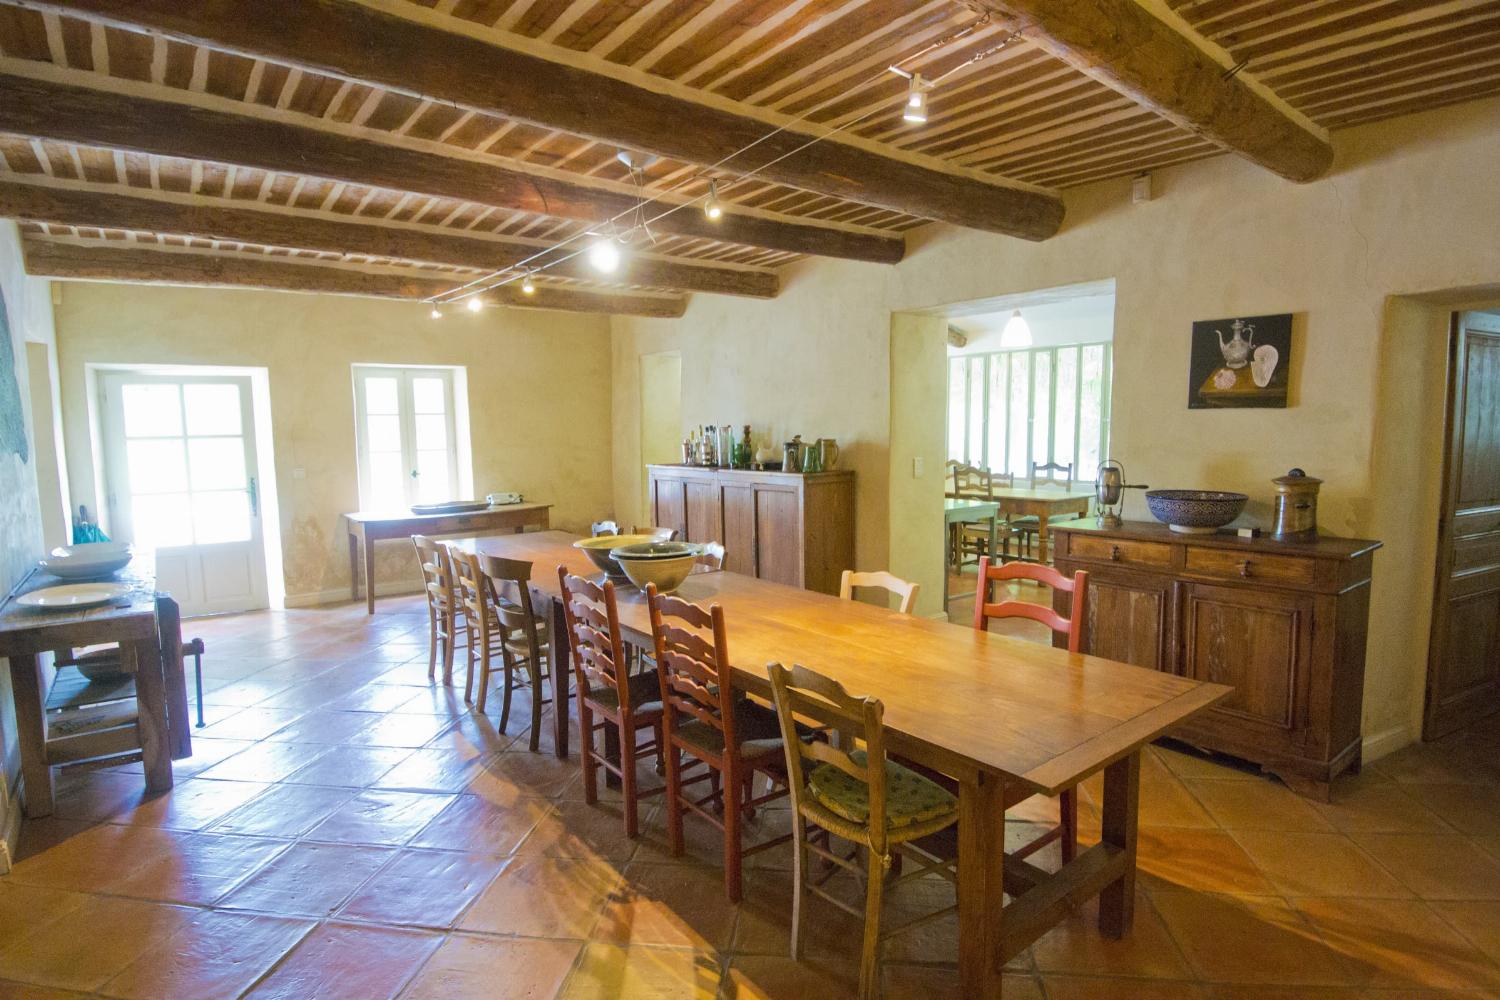 Dining room | Rental home in Provence